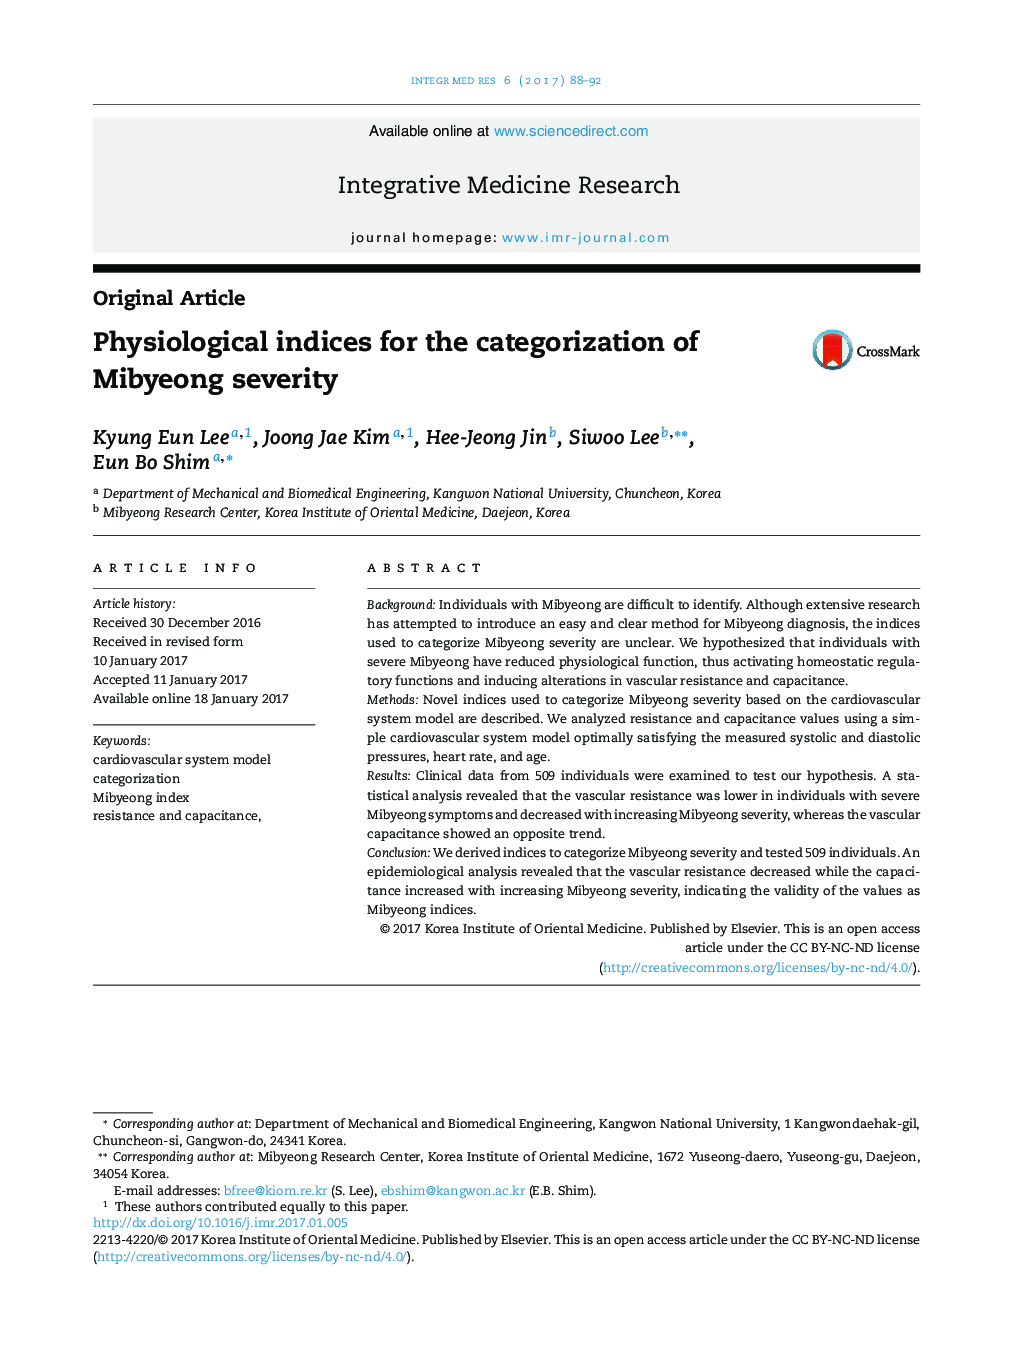 Physiological indices for the categorization of Mibyeong severity